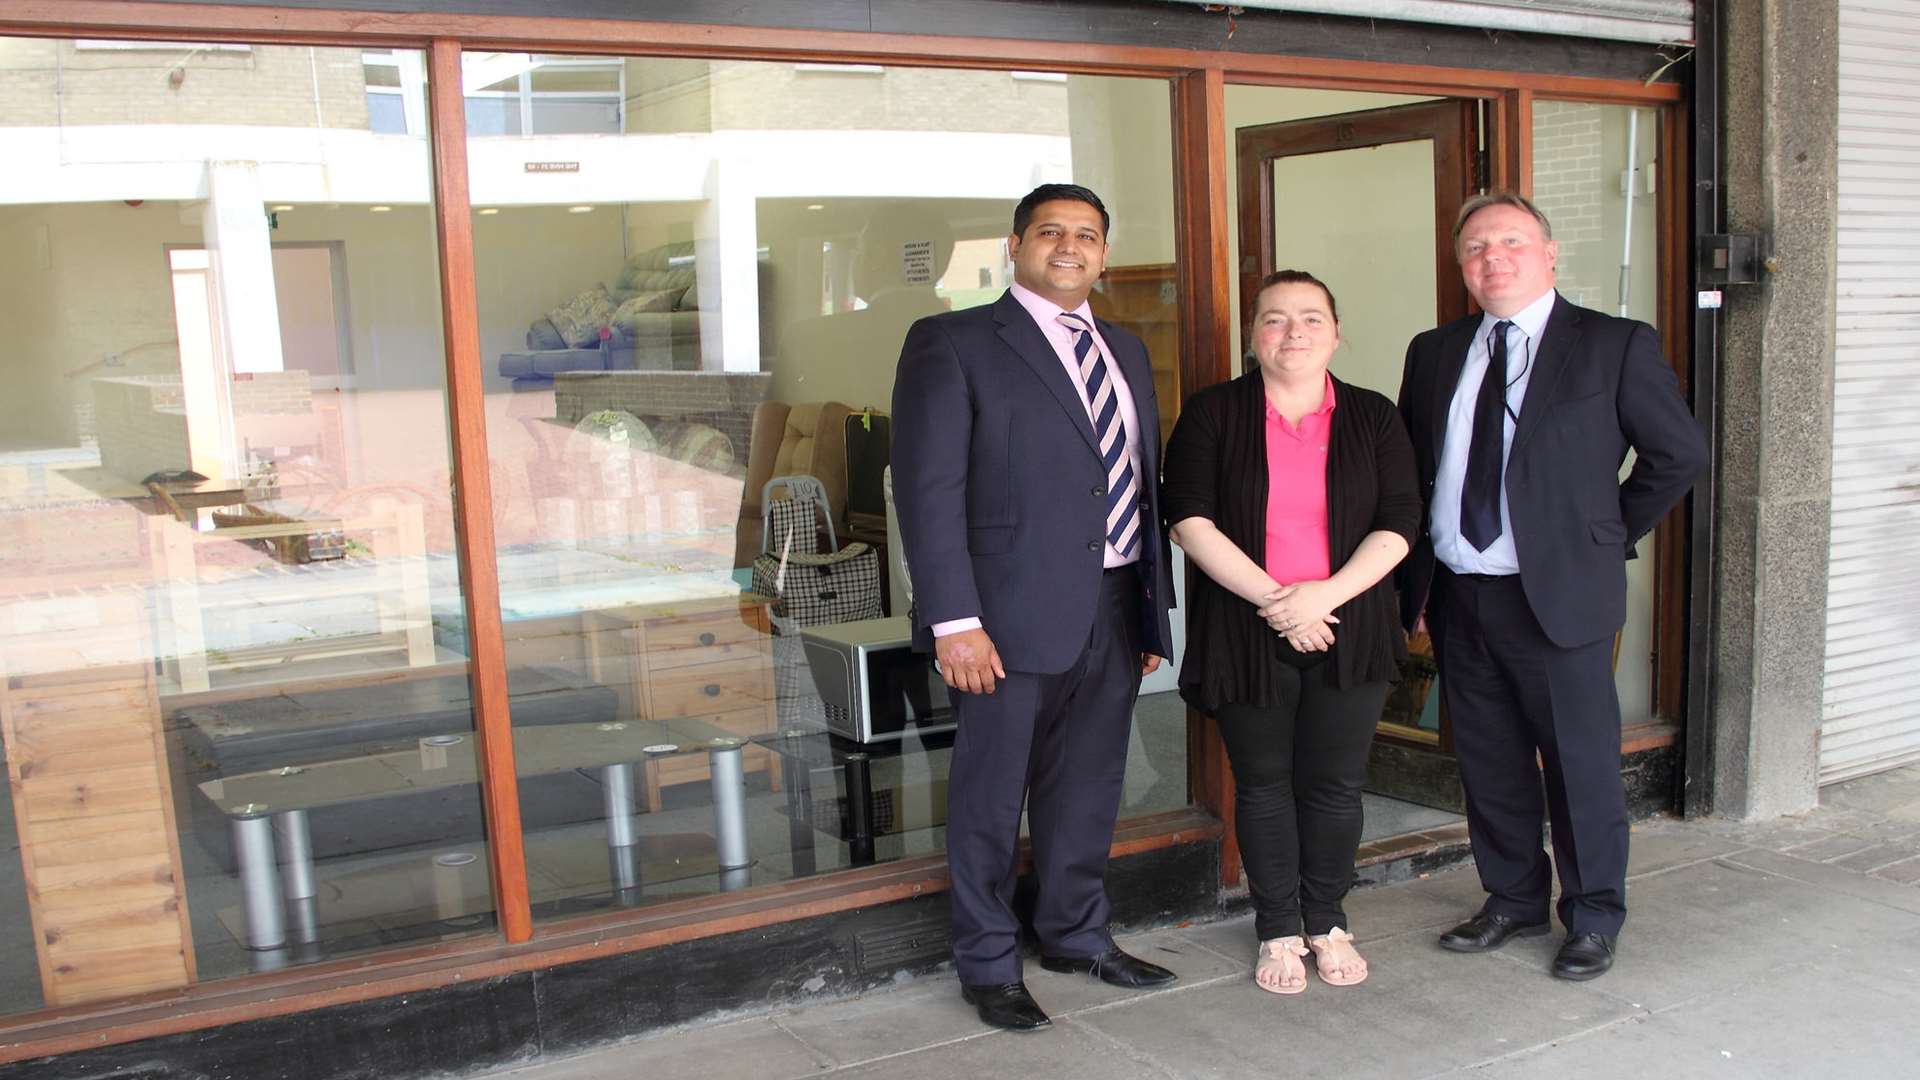 From left to right: Cllr Samir Jassal, Sarah Cooke and Simon Hookway